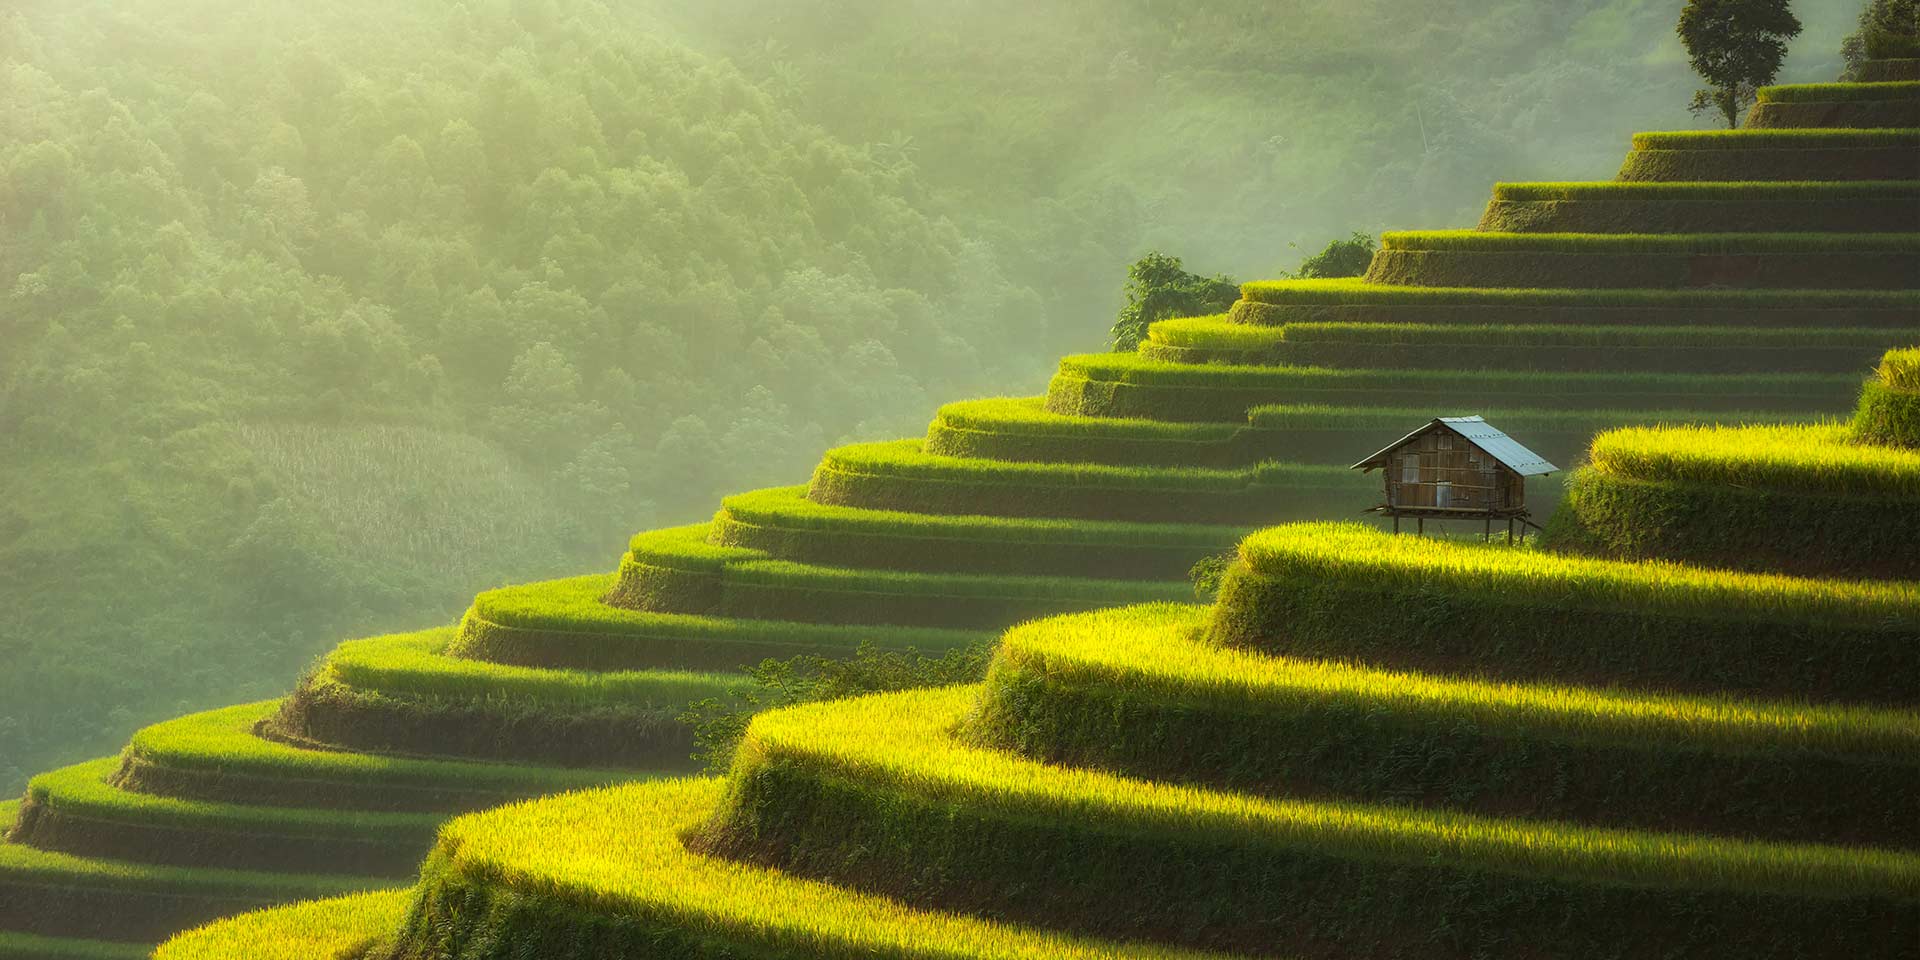 steeped green rice terraces in vietnam